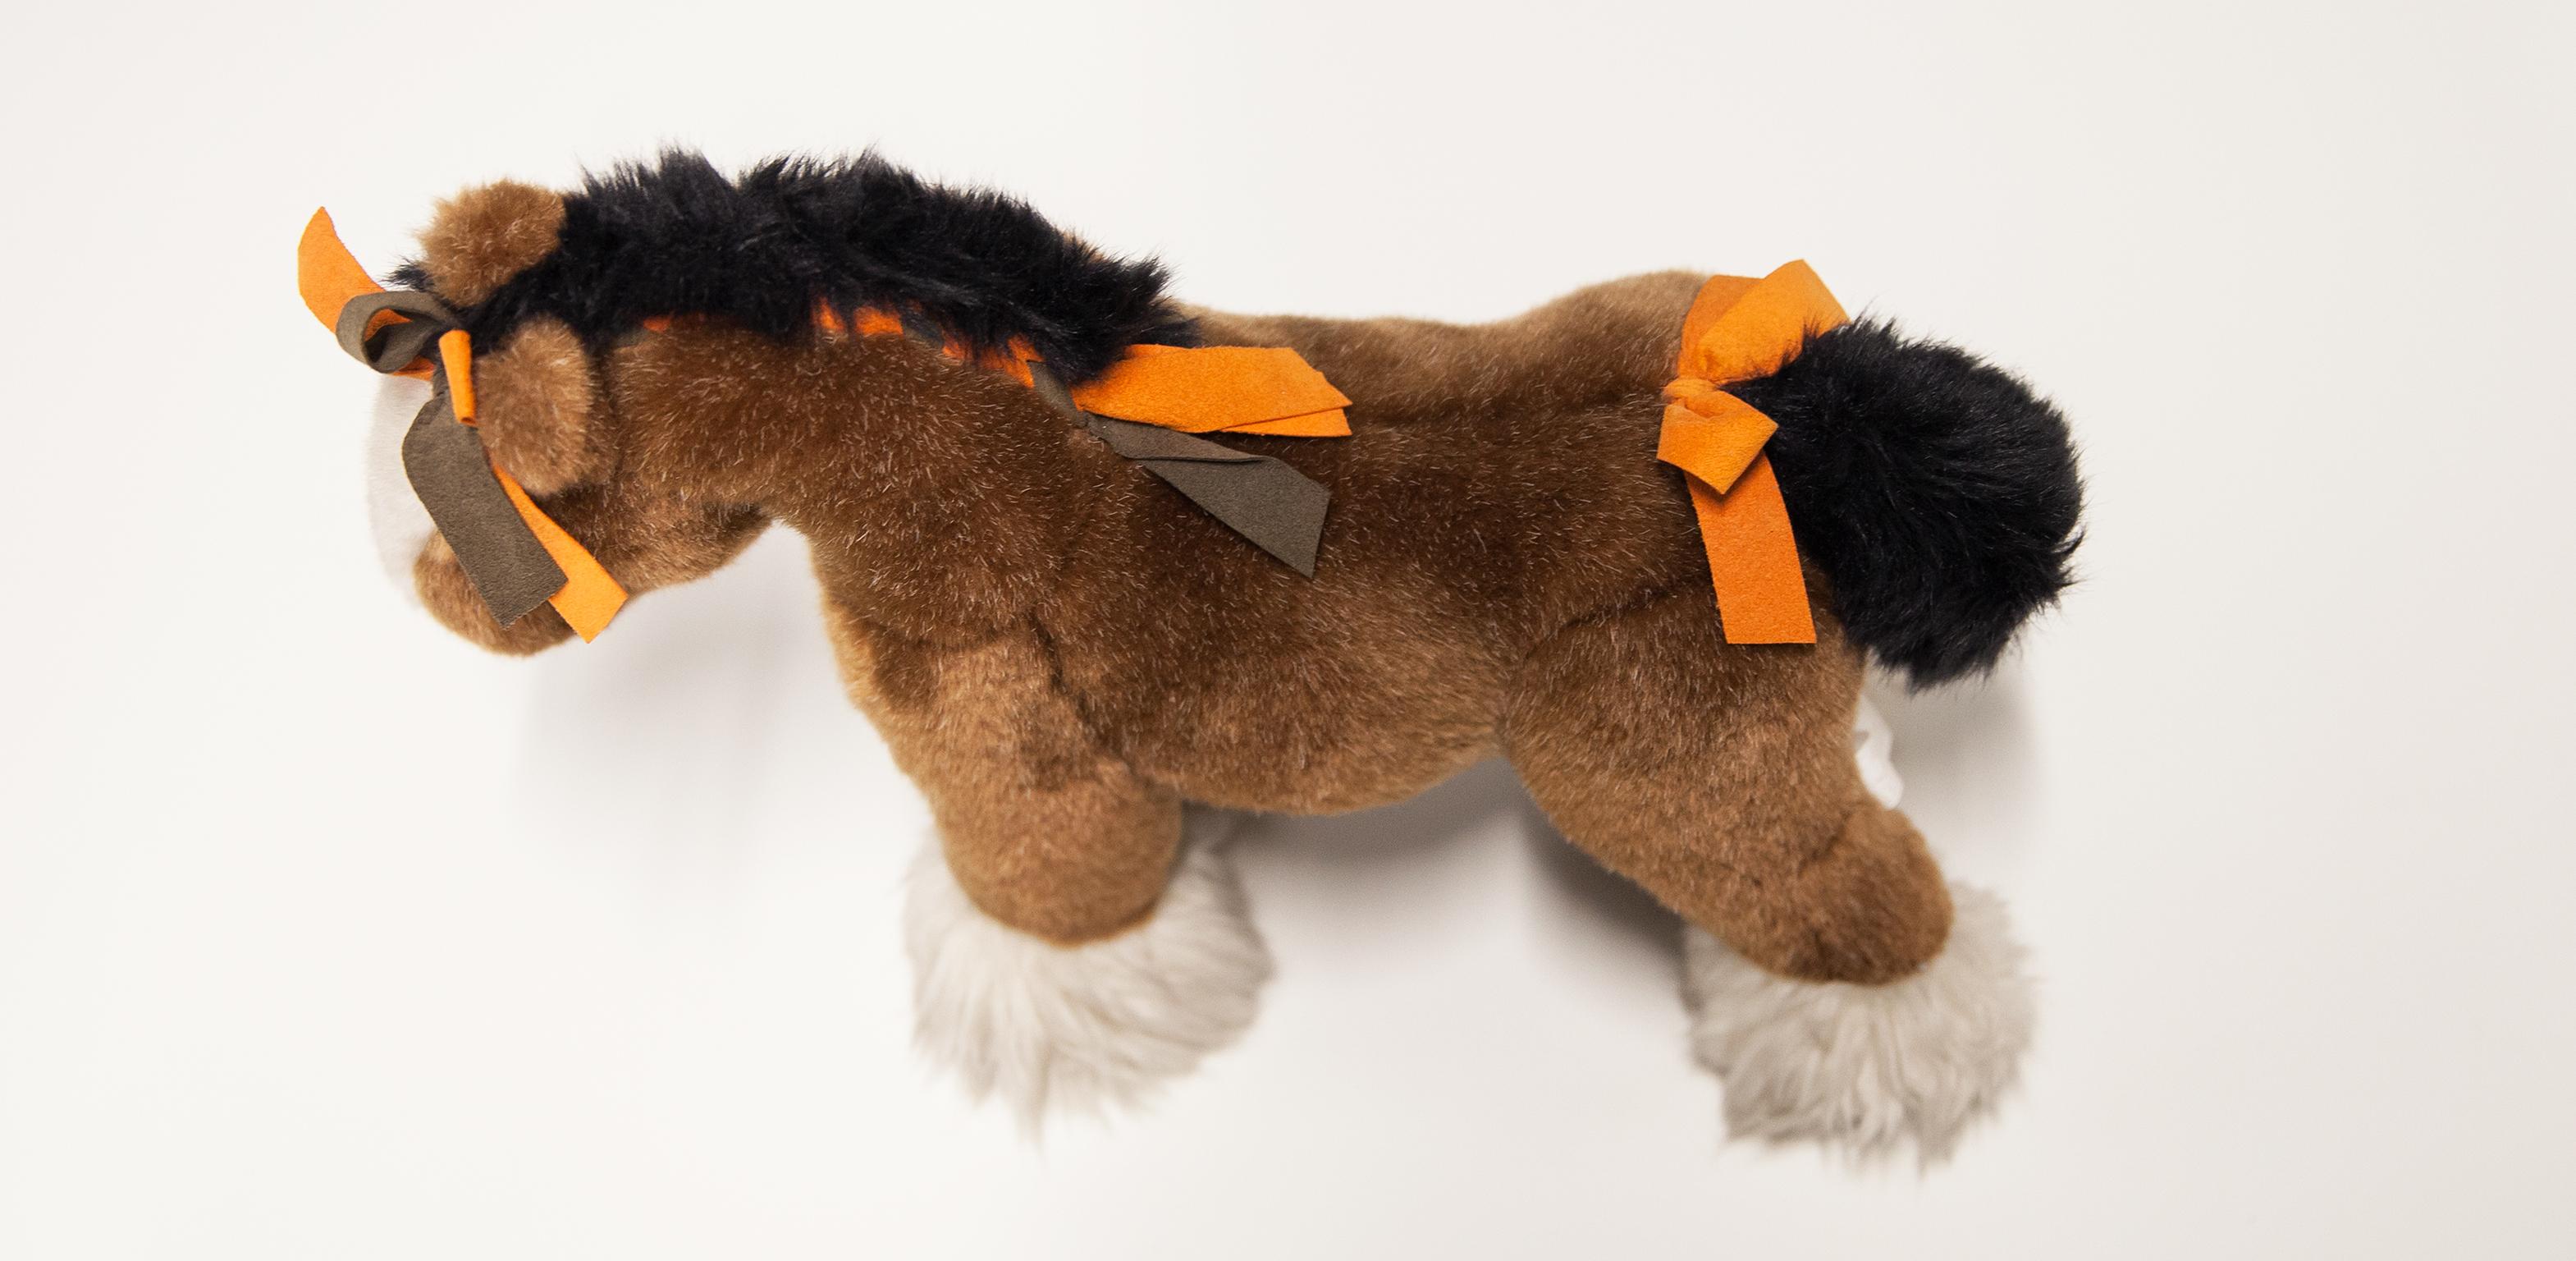 French Hermes Stuffed Toy Hermy Horse For Sale